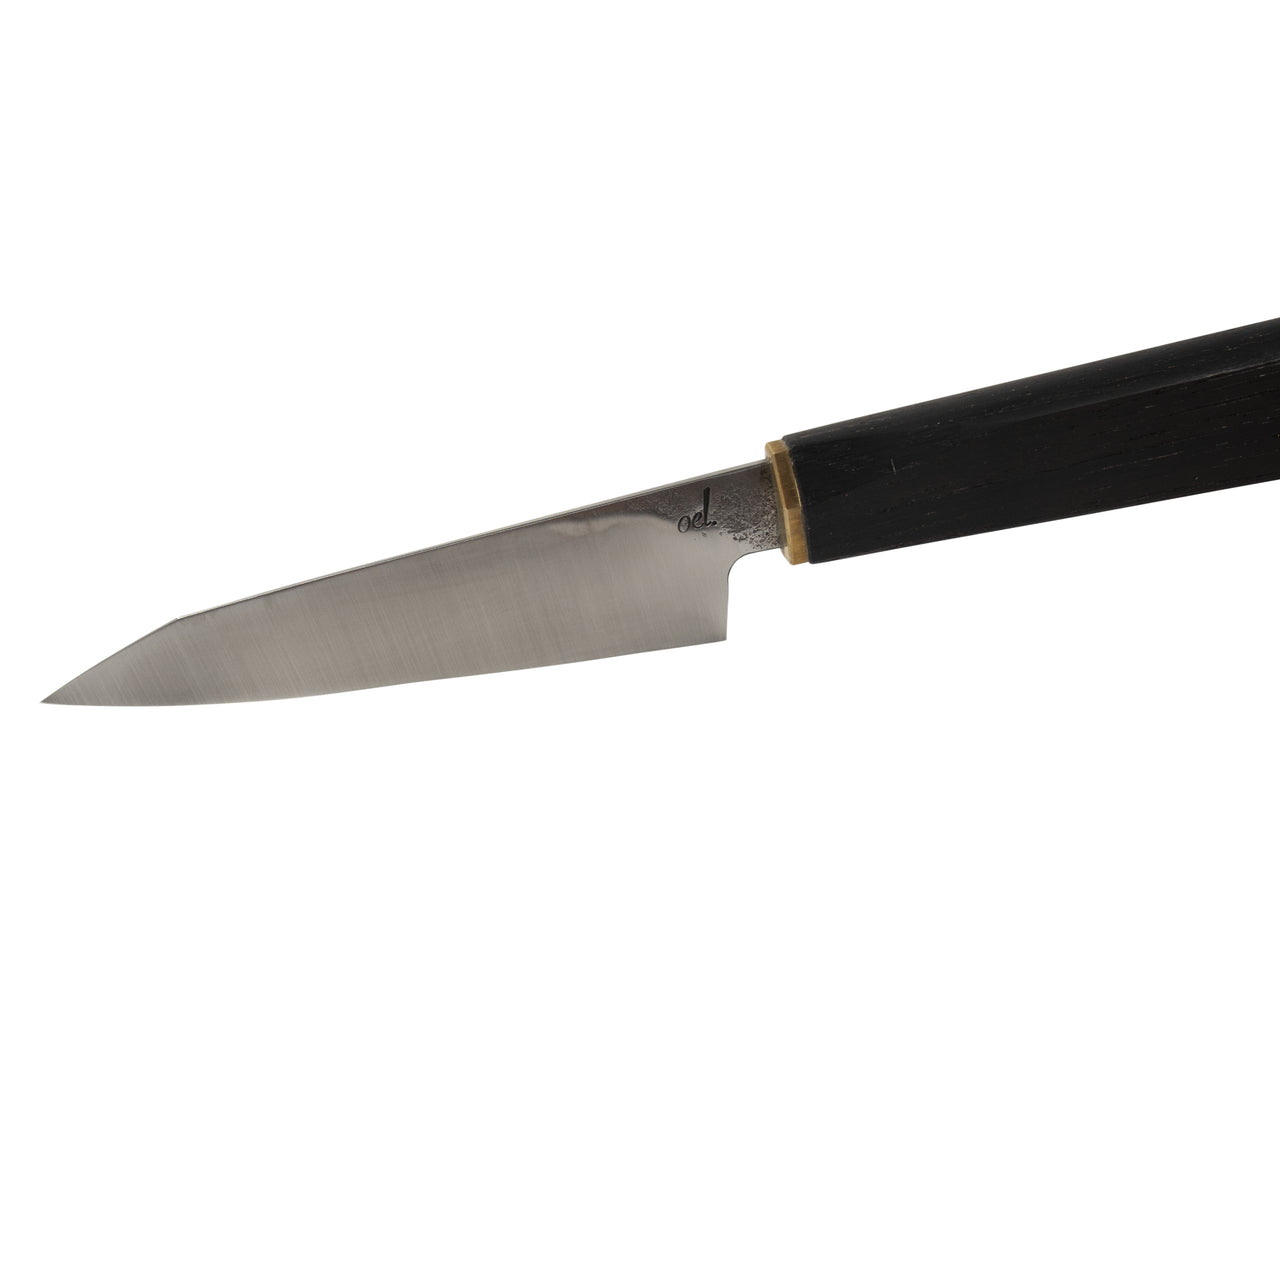 Oliver Märtens Petty 100mm Mono Steel 1.2419.05 with Bog Oak and Brass Bolster - Profile